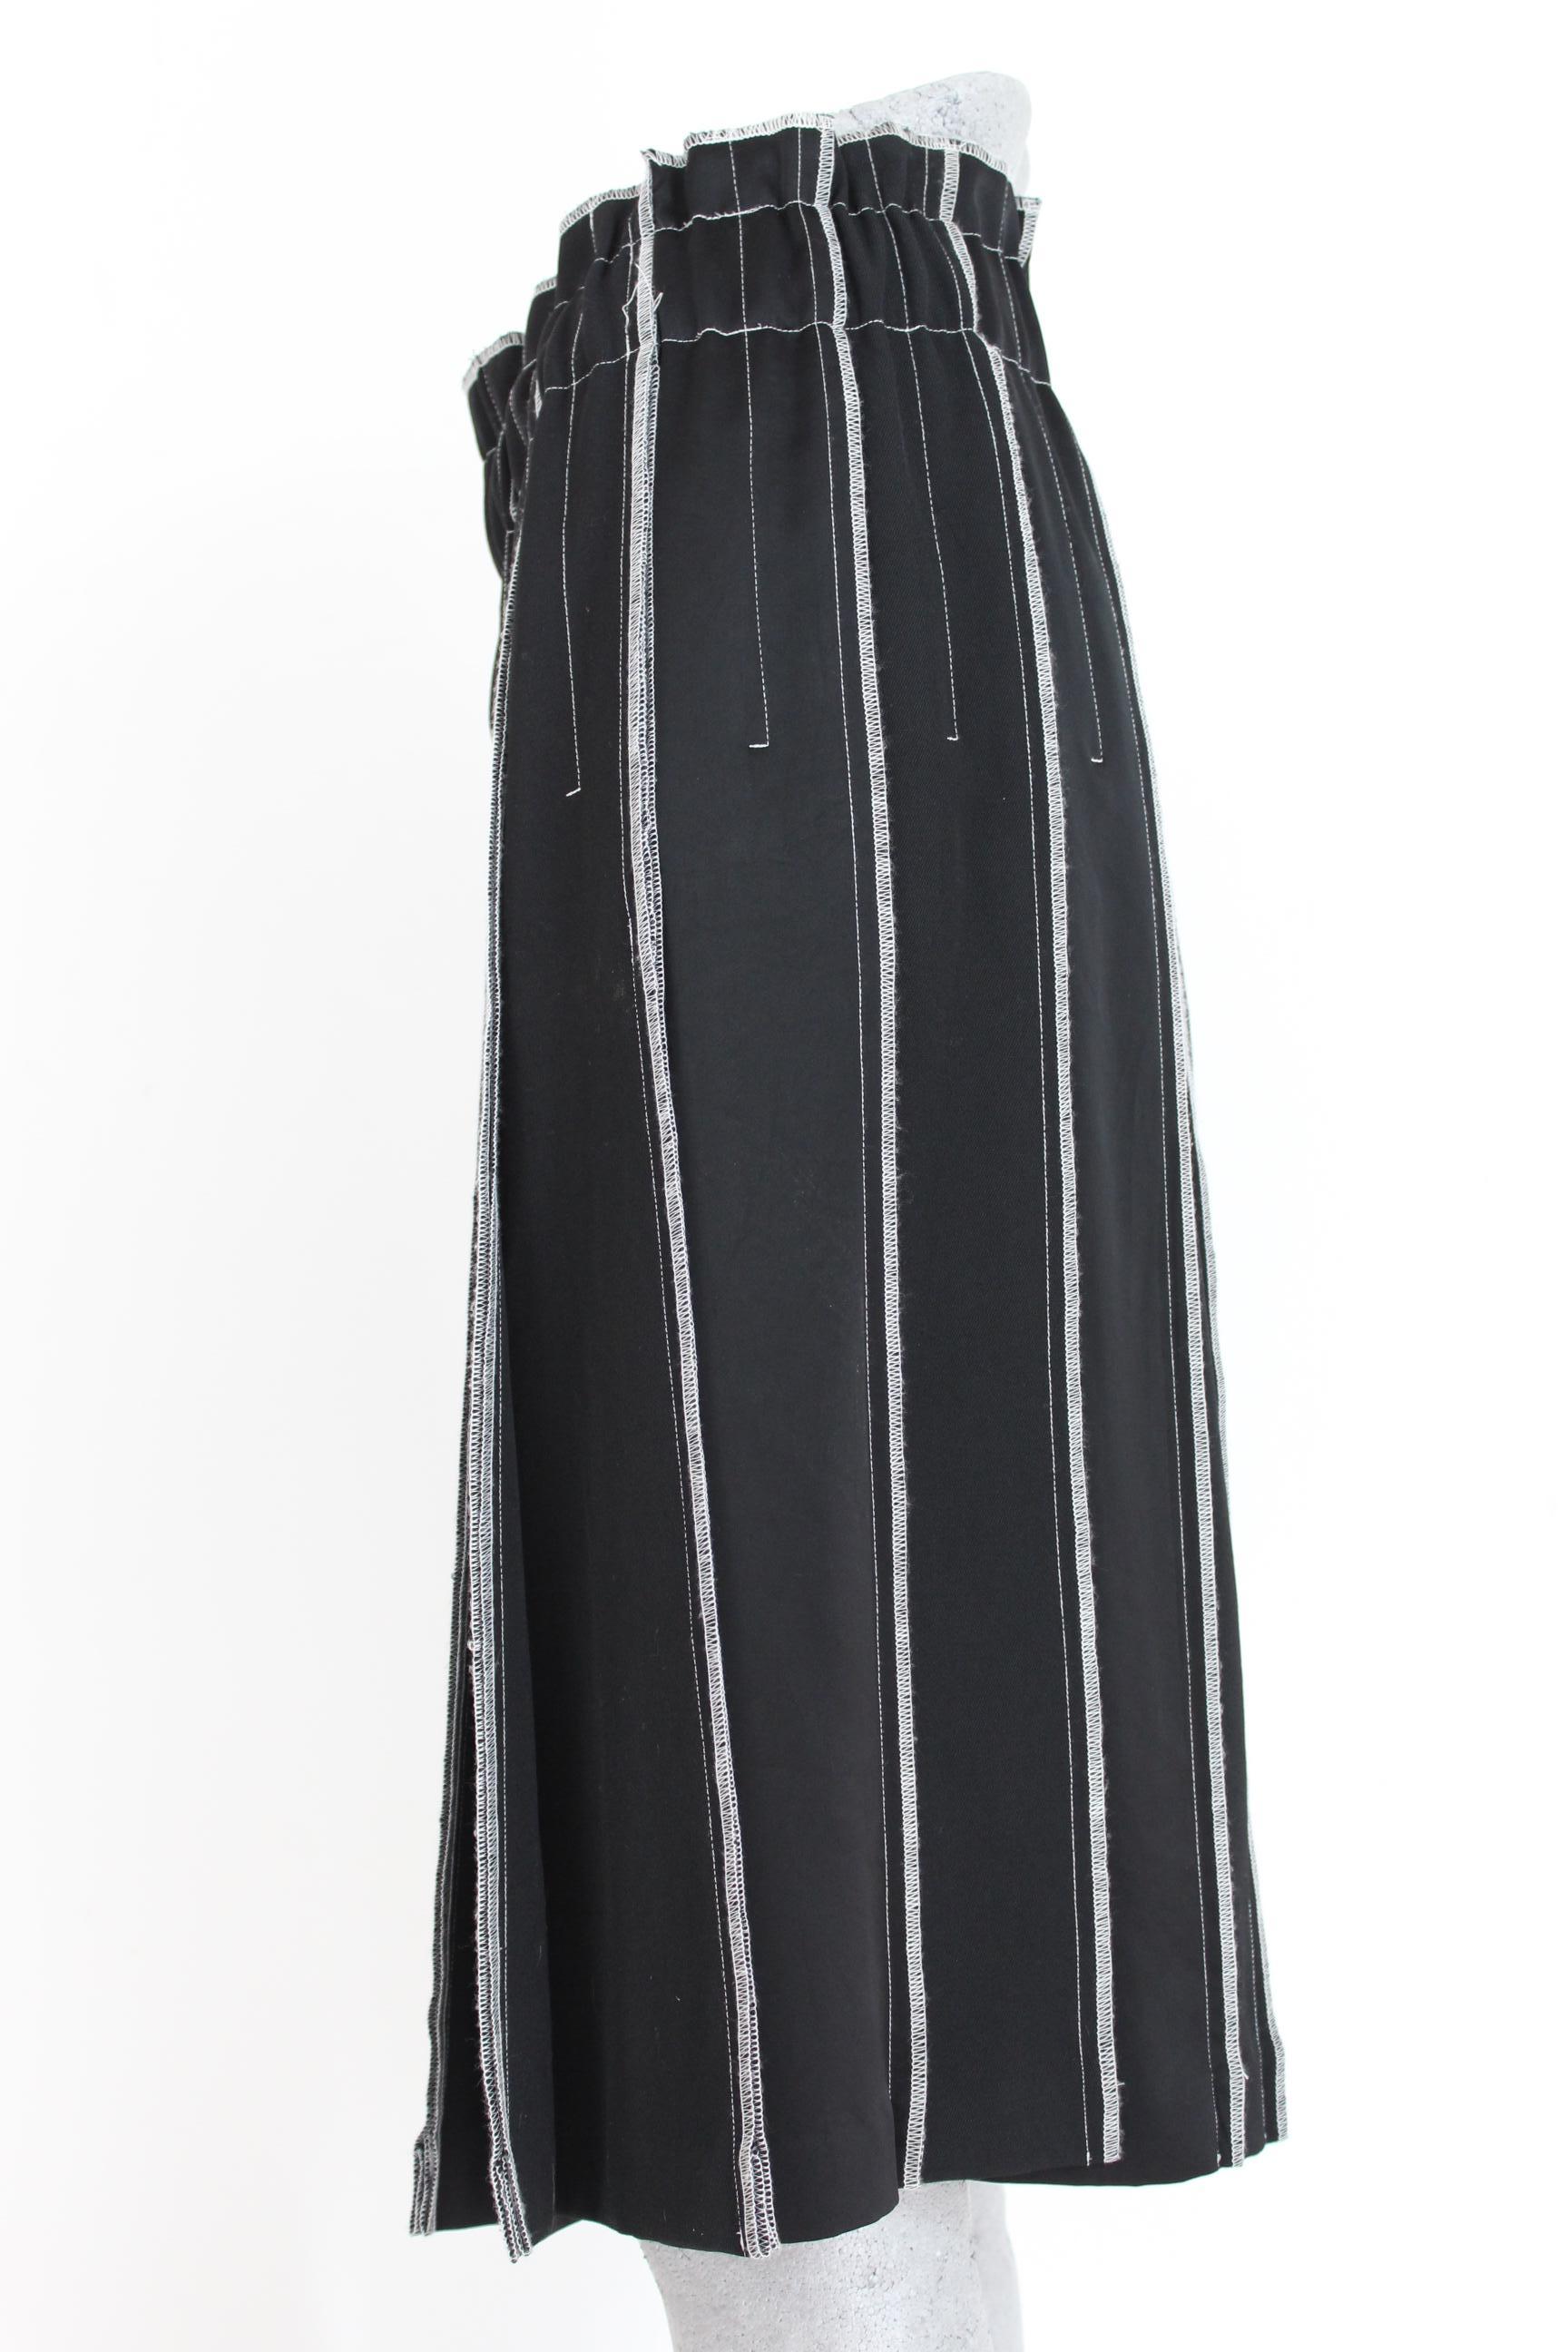 Donna Karan DKNY Black Pleated Skirt Pants 2000s In Excellent Condition In Brindisi, Bt